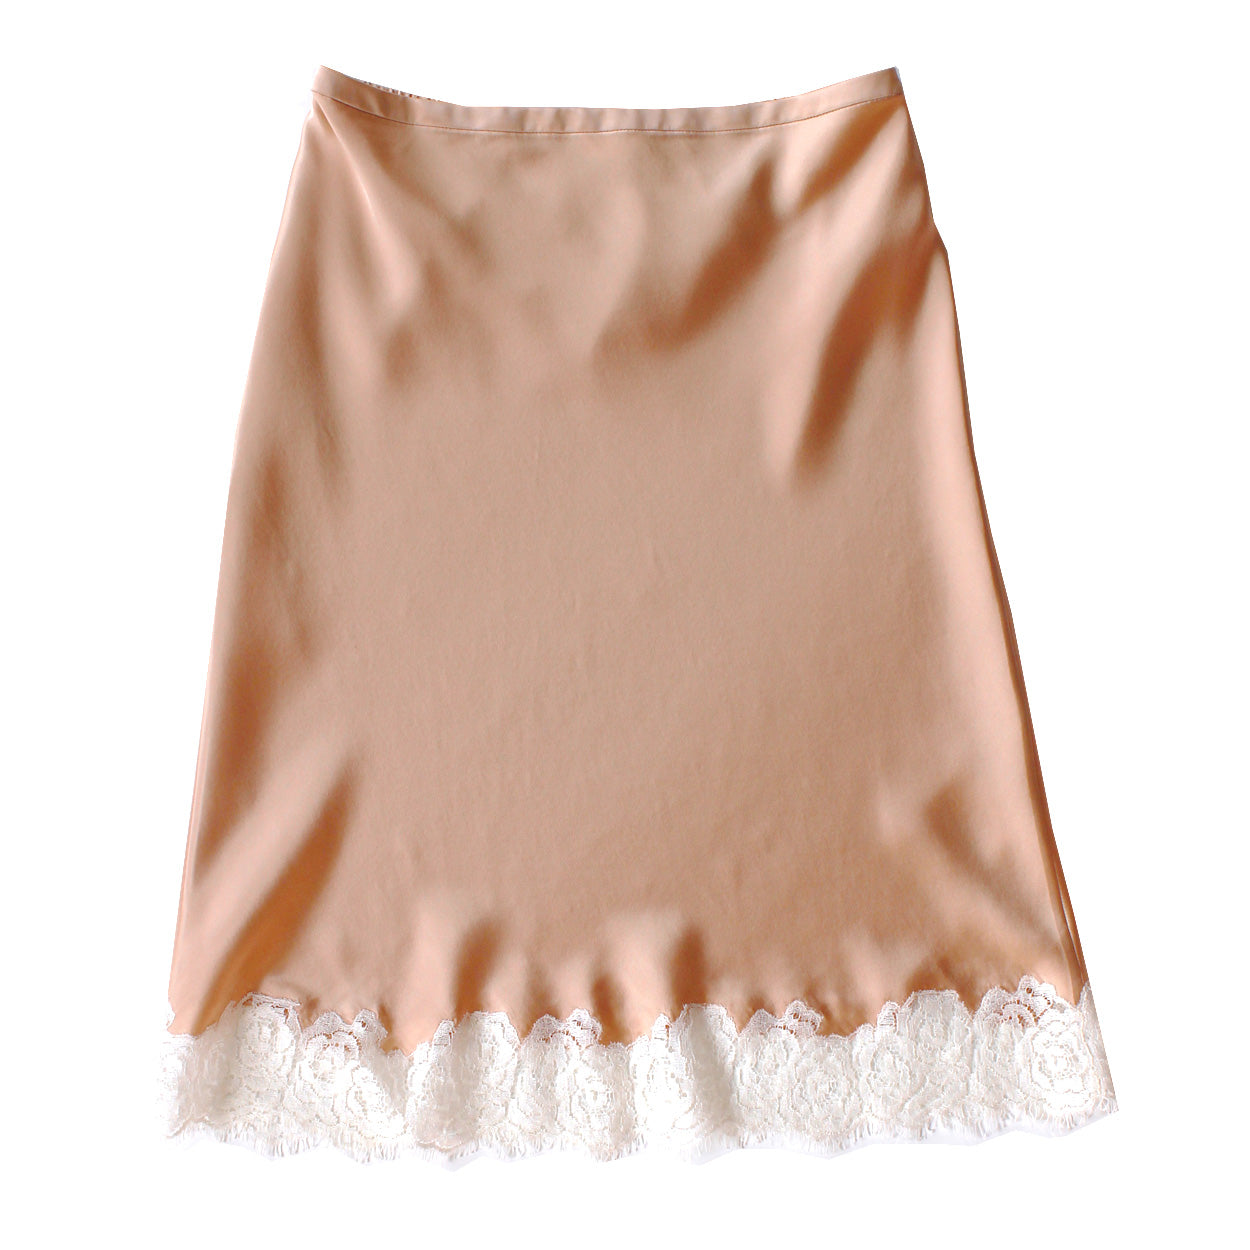 Kali Half Slip in Rose Gold Silk Charmeuse with Ivory Lace